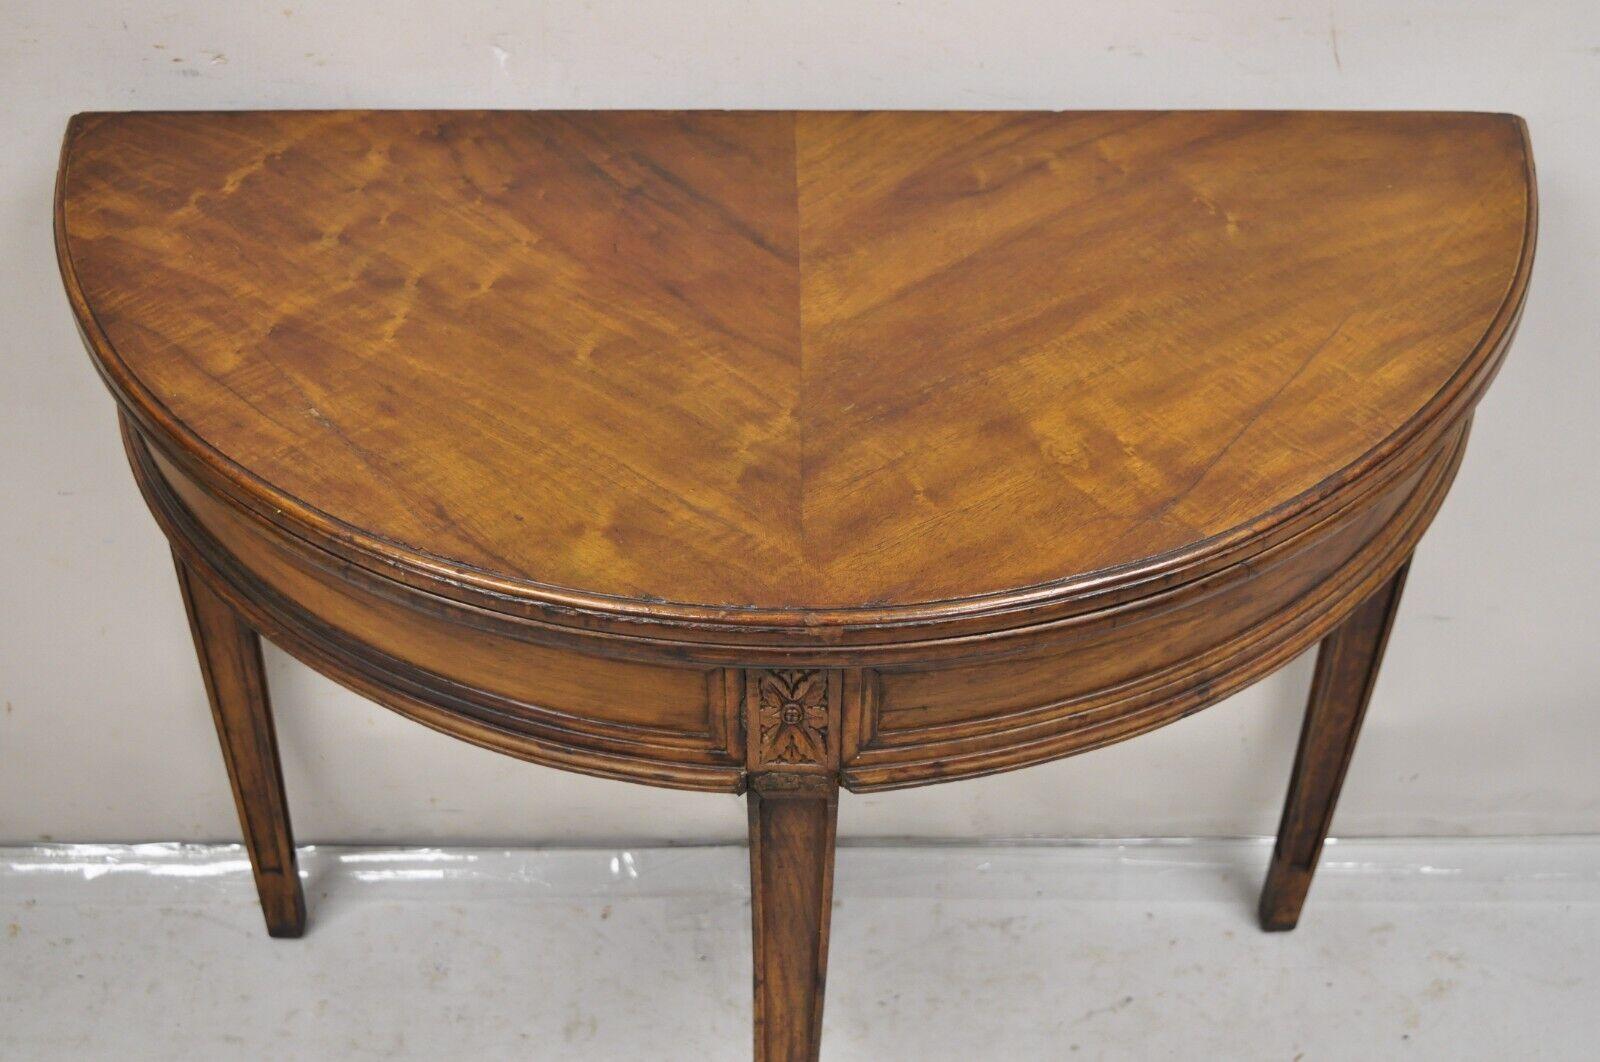 Antique Mahogany Demilune Flip Top Console Game Table with Rear Drawer. Item features a hidden pull out rear drawer with hand dovetail, flip top, nicely carved details, beautiful wood grain, very nice antique item. Circa  19th Century.
Measurements: